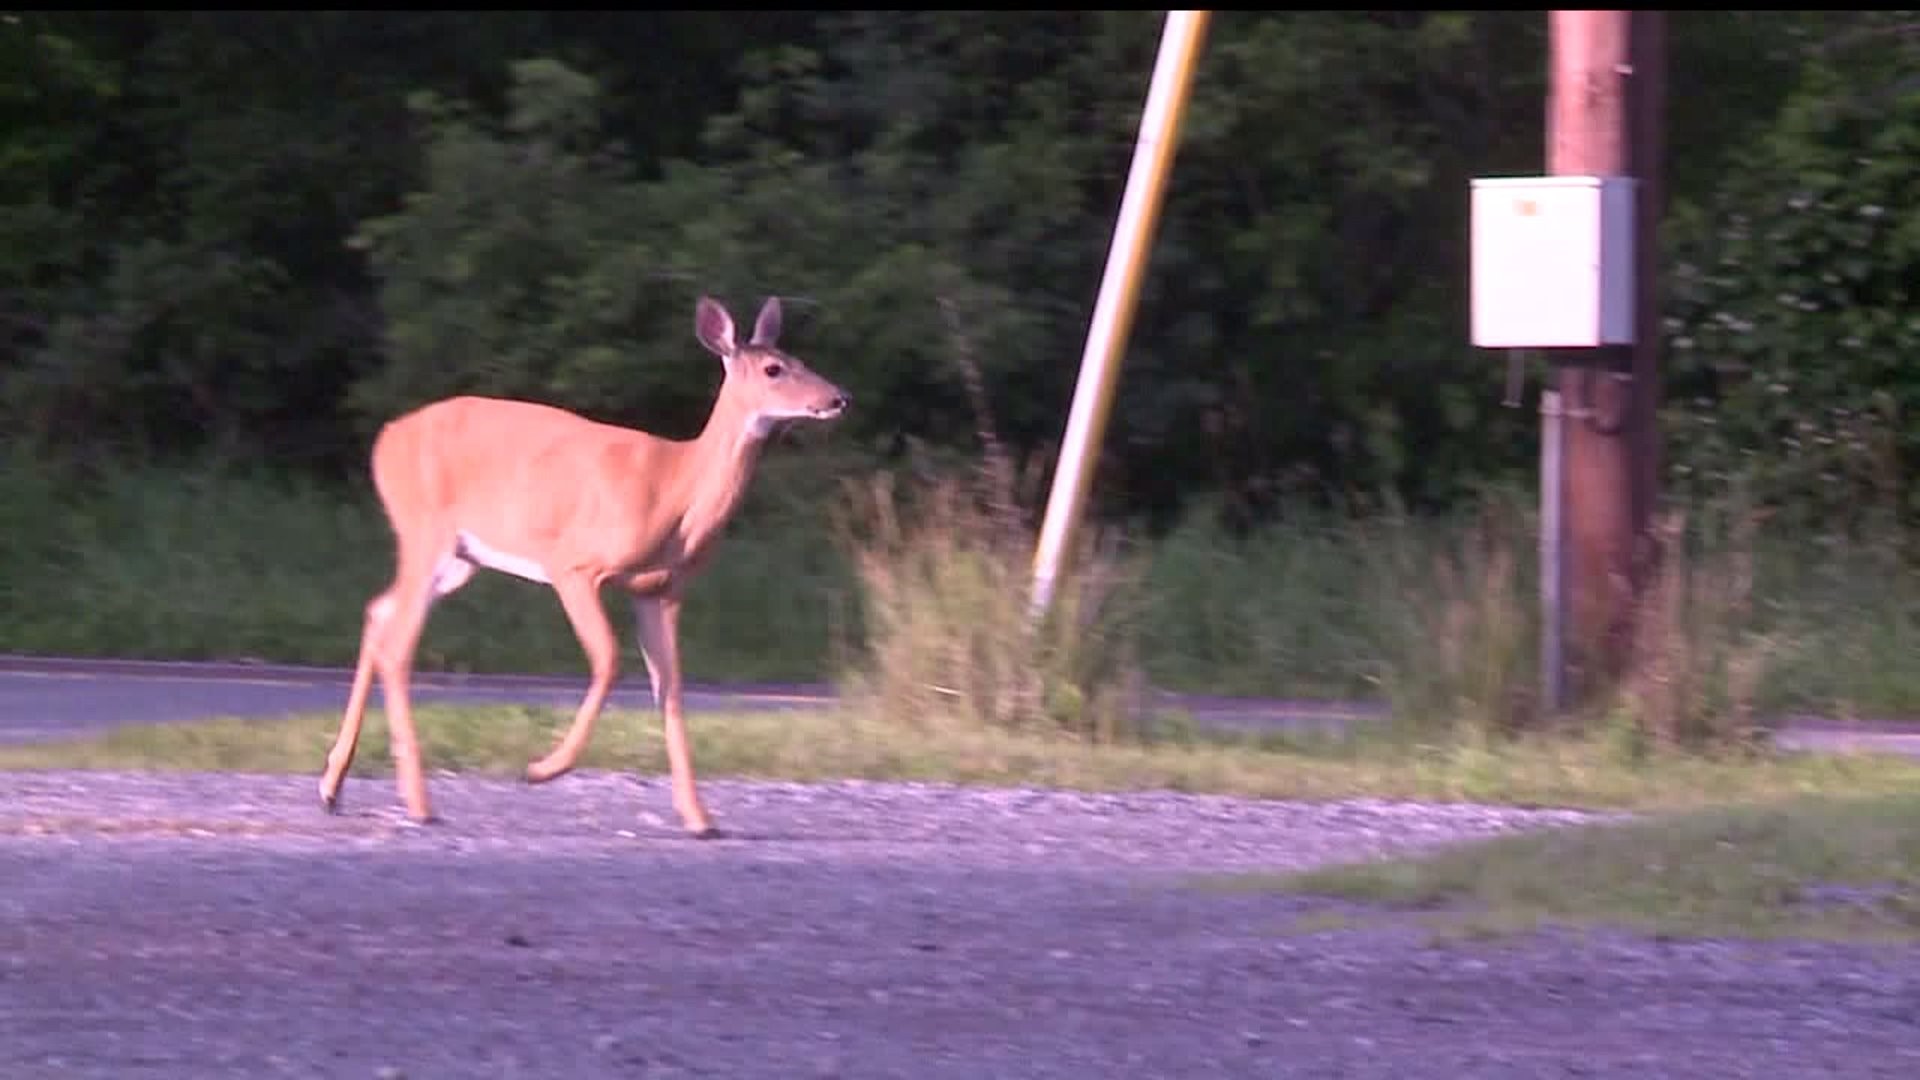 PA Game Commission Warns Drivers of Deer Activity Ahead of Daylight-Saving Time